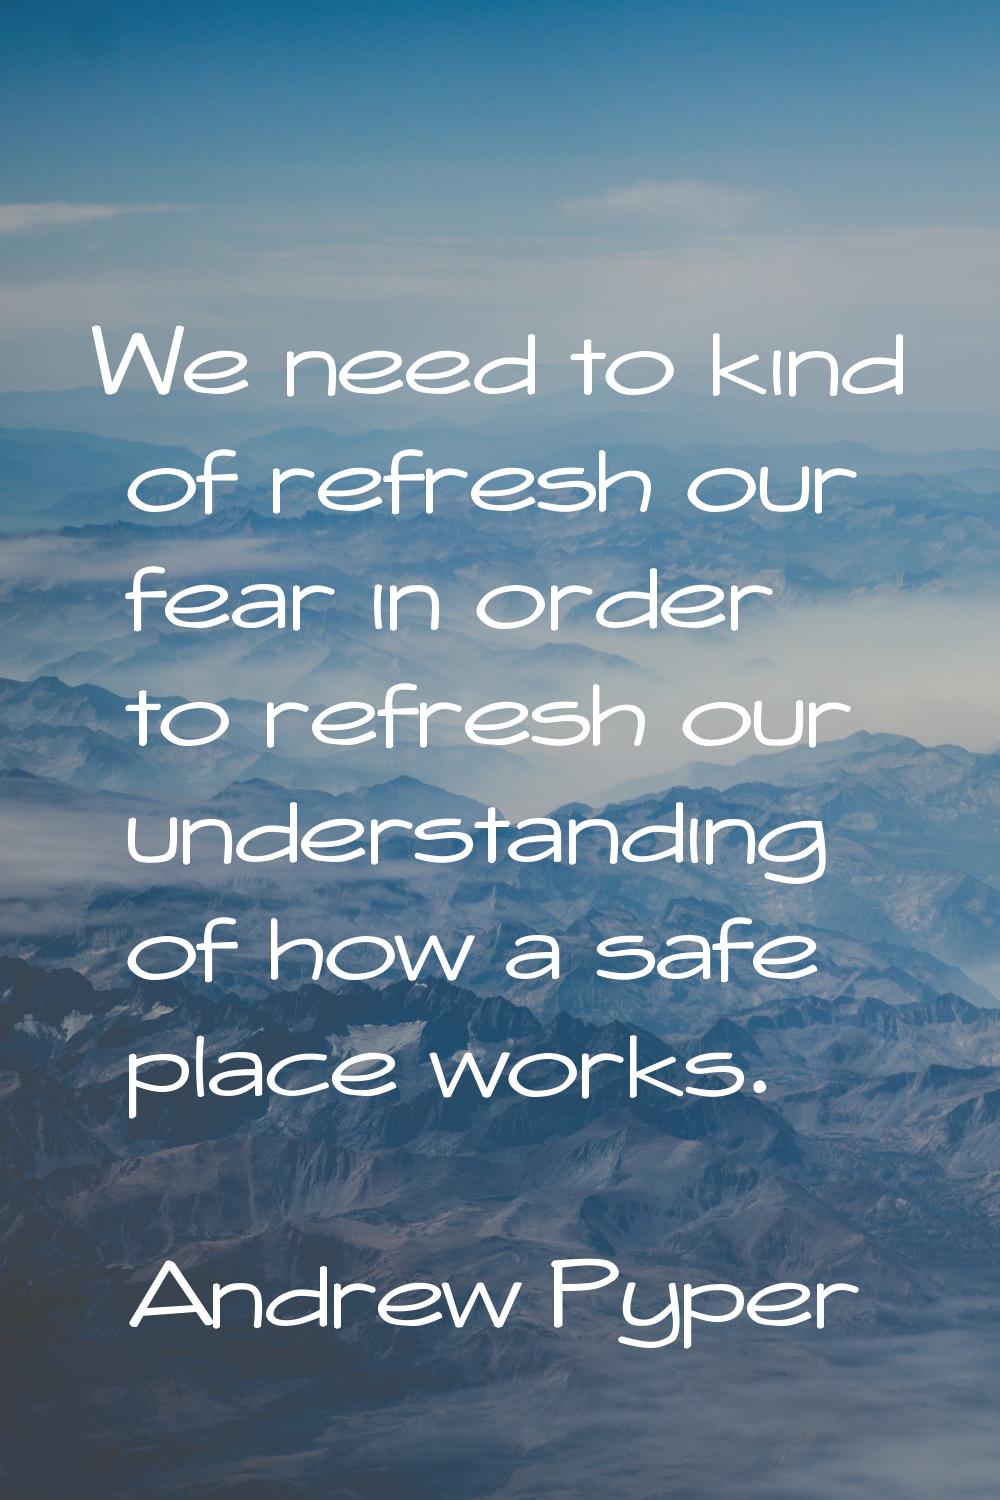 We need to kind of refresh our fear in order to refresh our understanding of how a safe place works